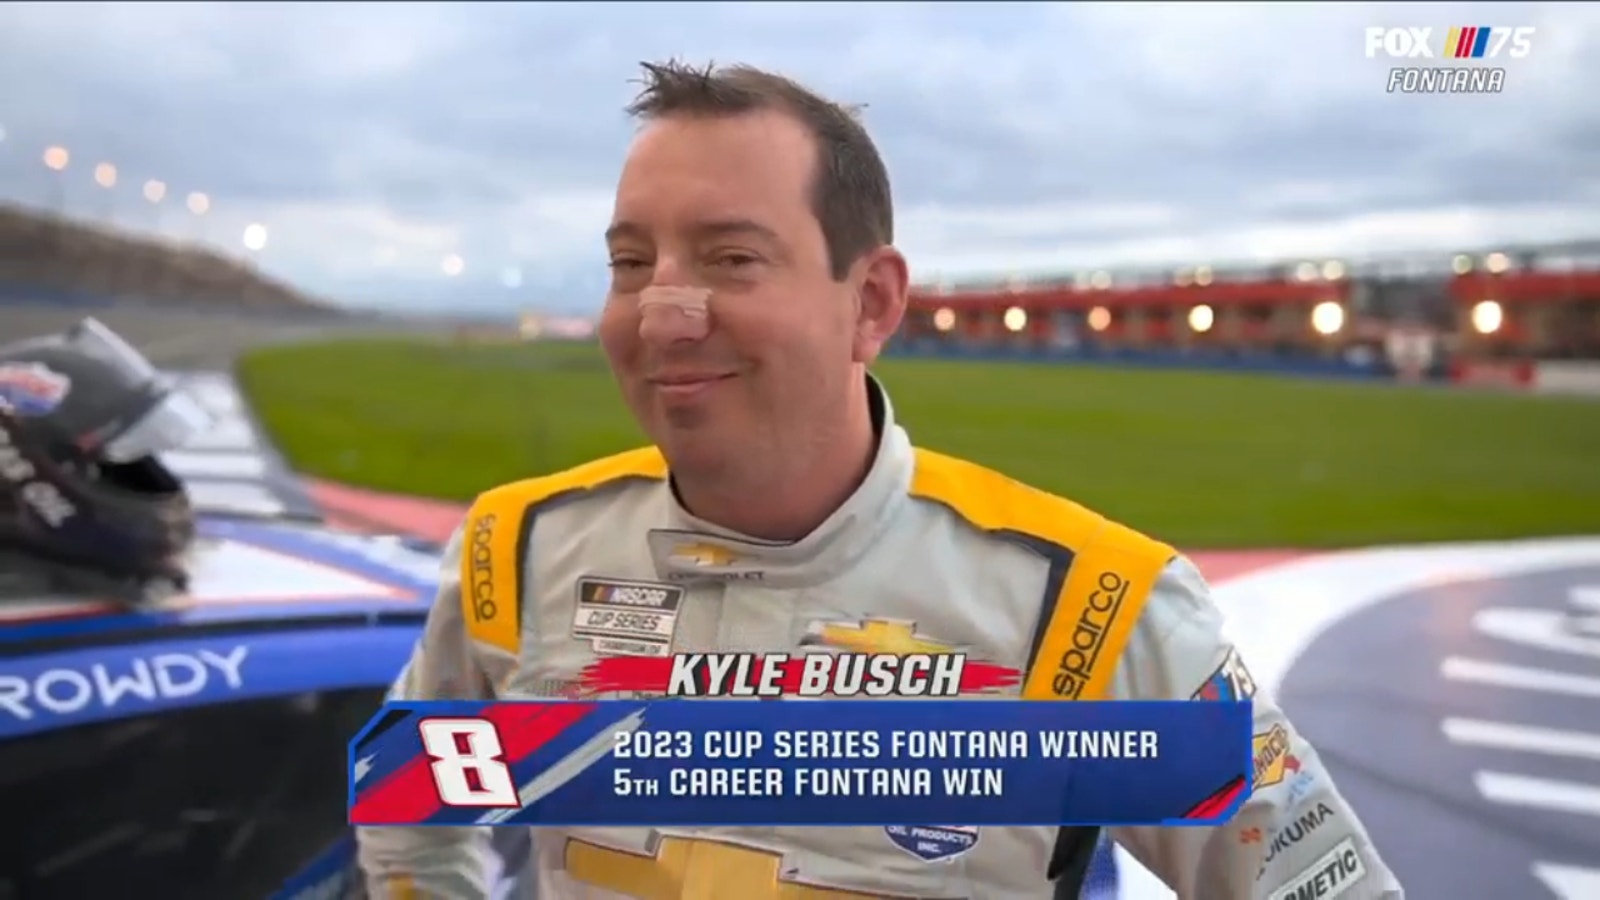 Kyle Busch says his first win with RCR is one of the most rewarding wins of his career.